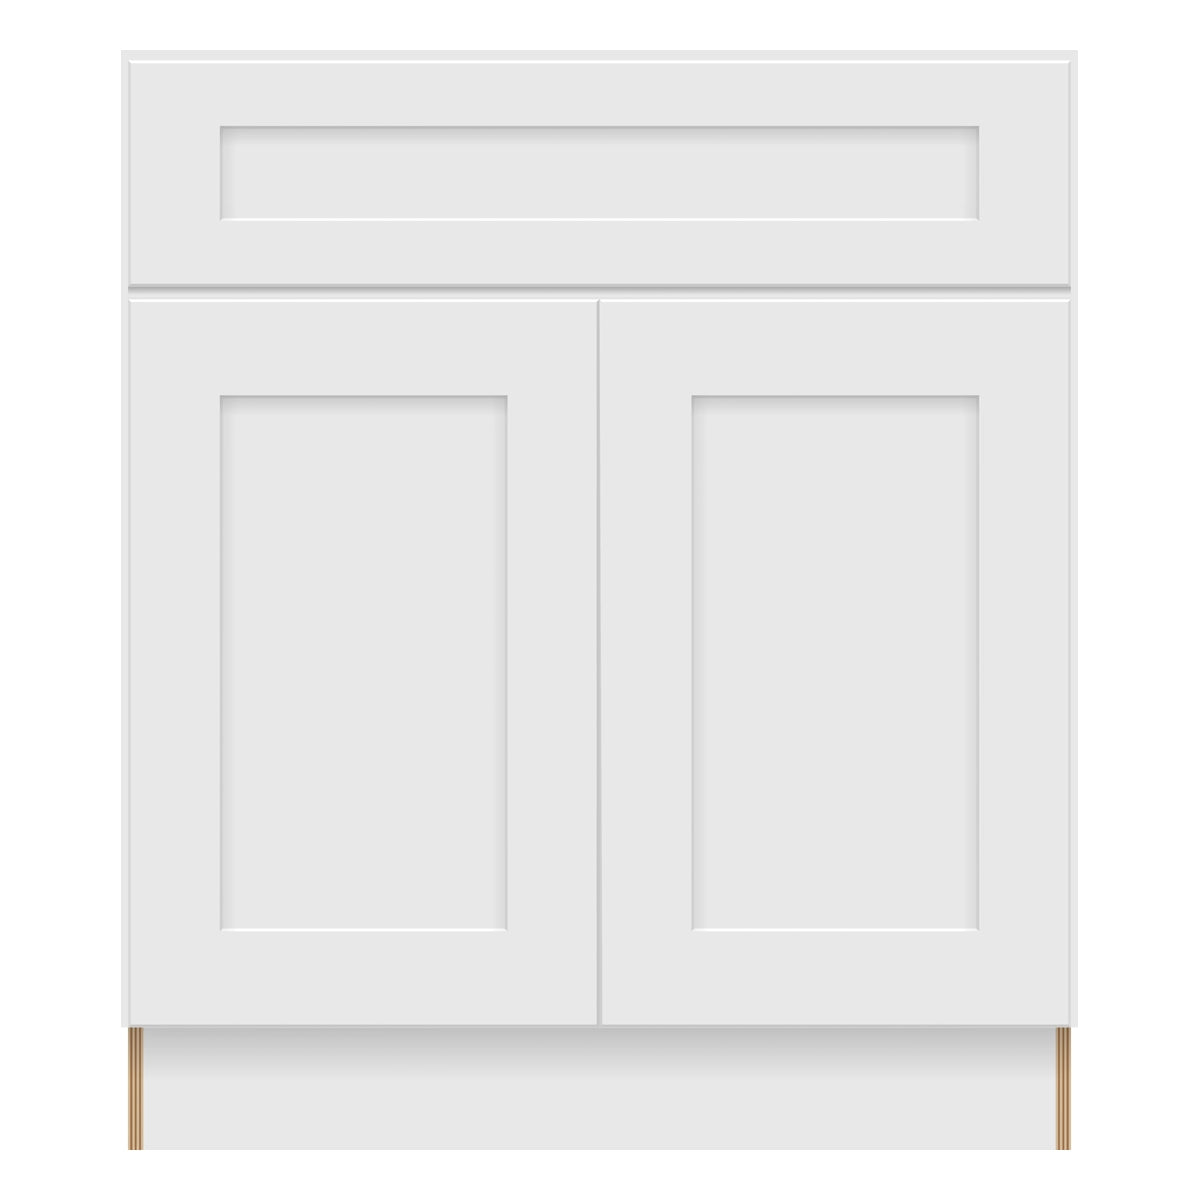 Craft Cabinetry Shaker White 30"W Sink Cabinet